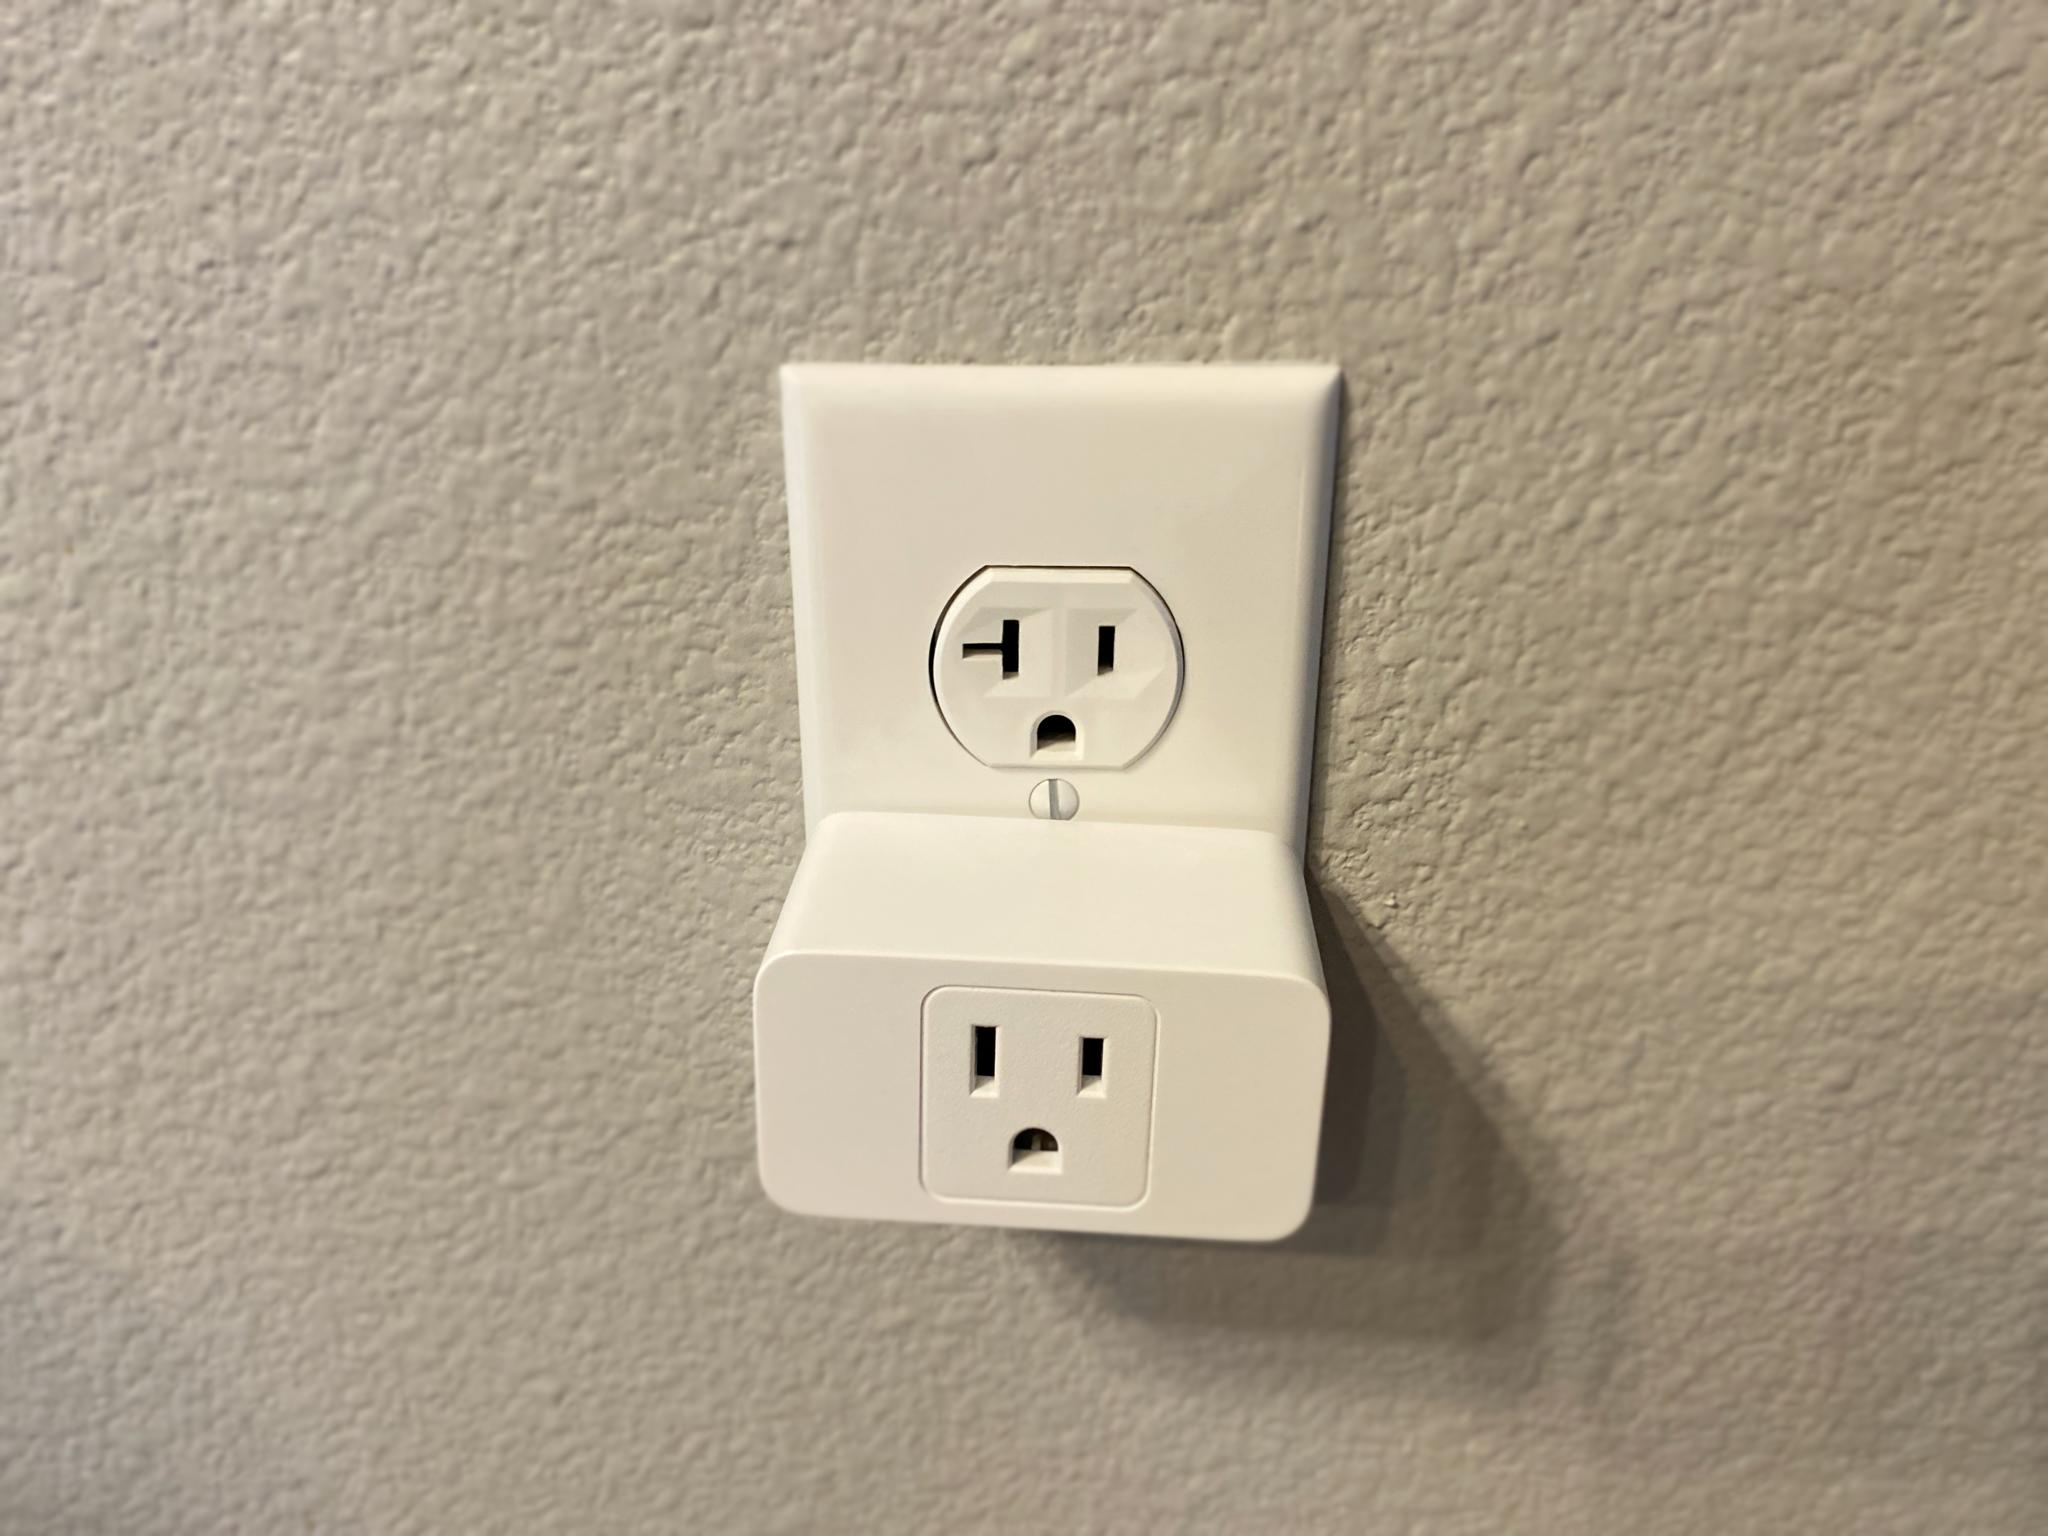 Meross Smart Wifi Plug Mini plugged in to an outlet